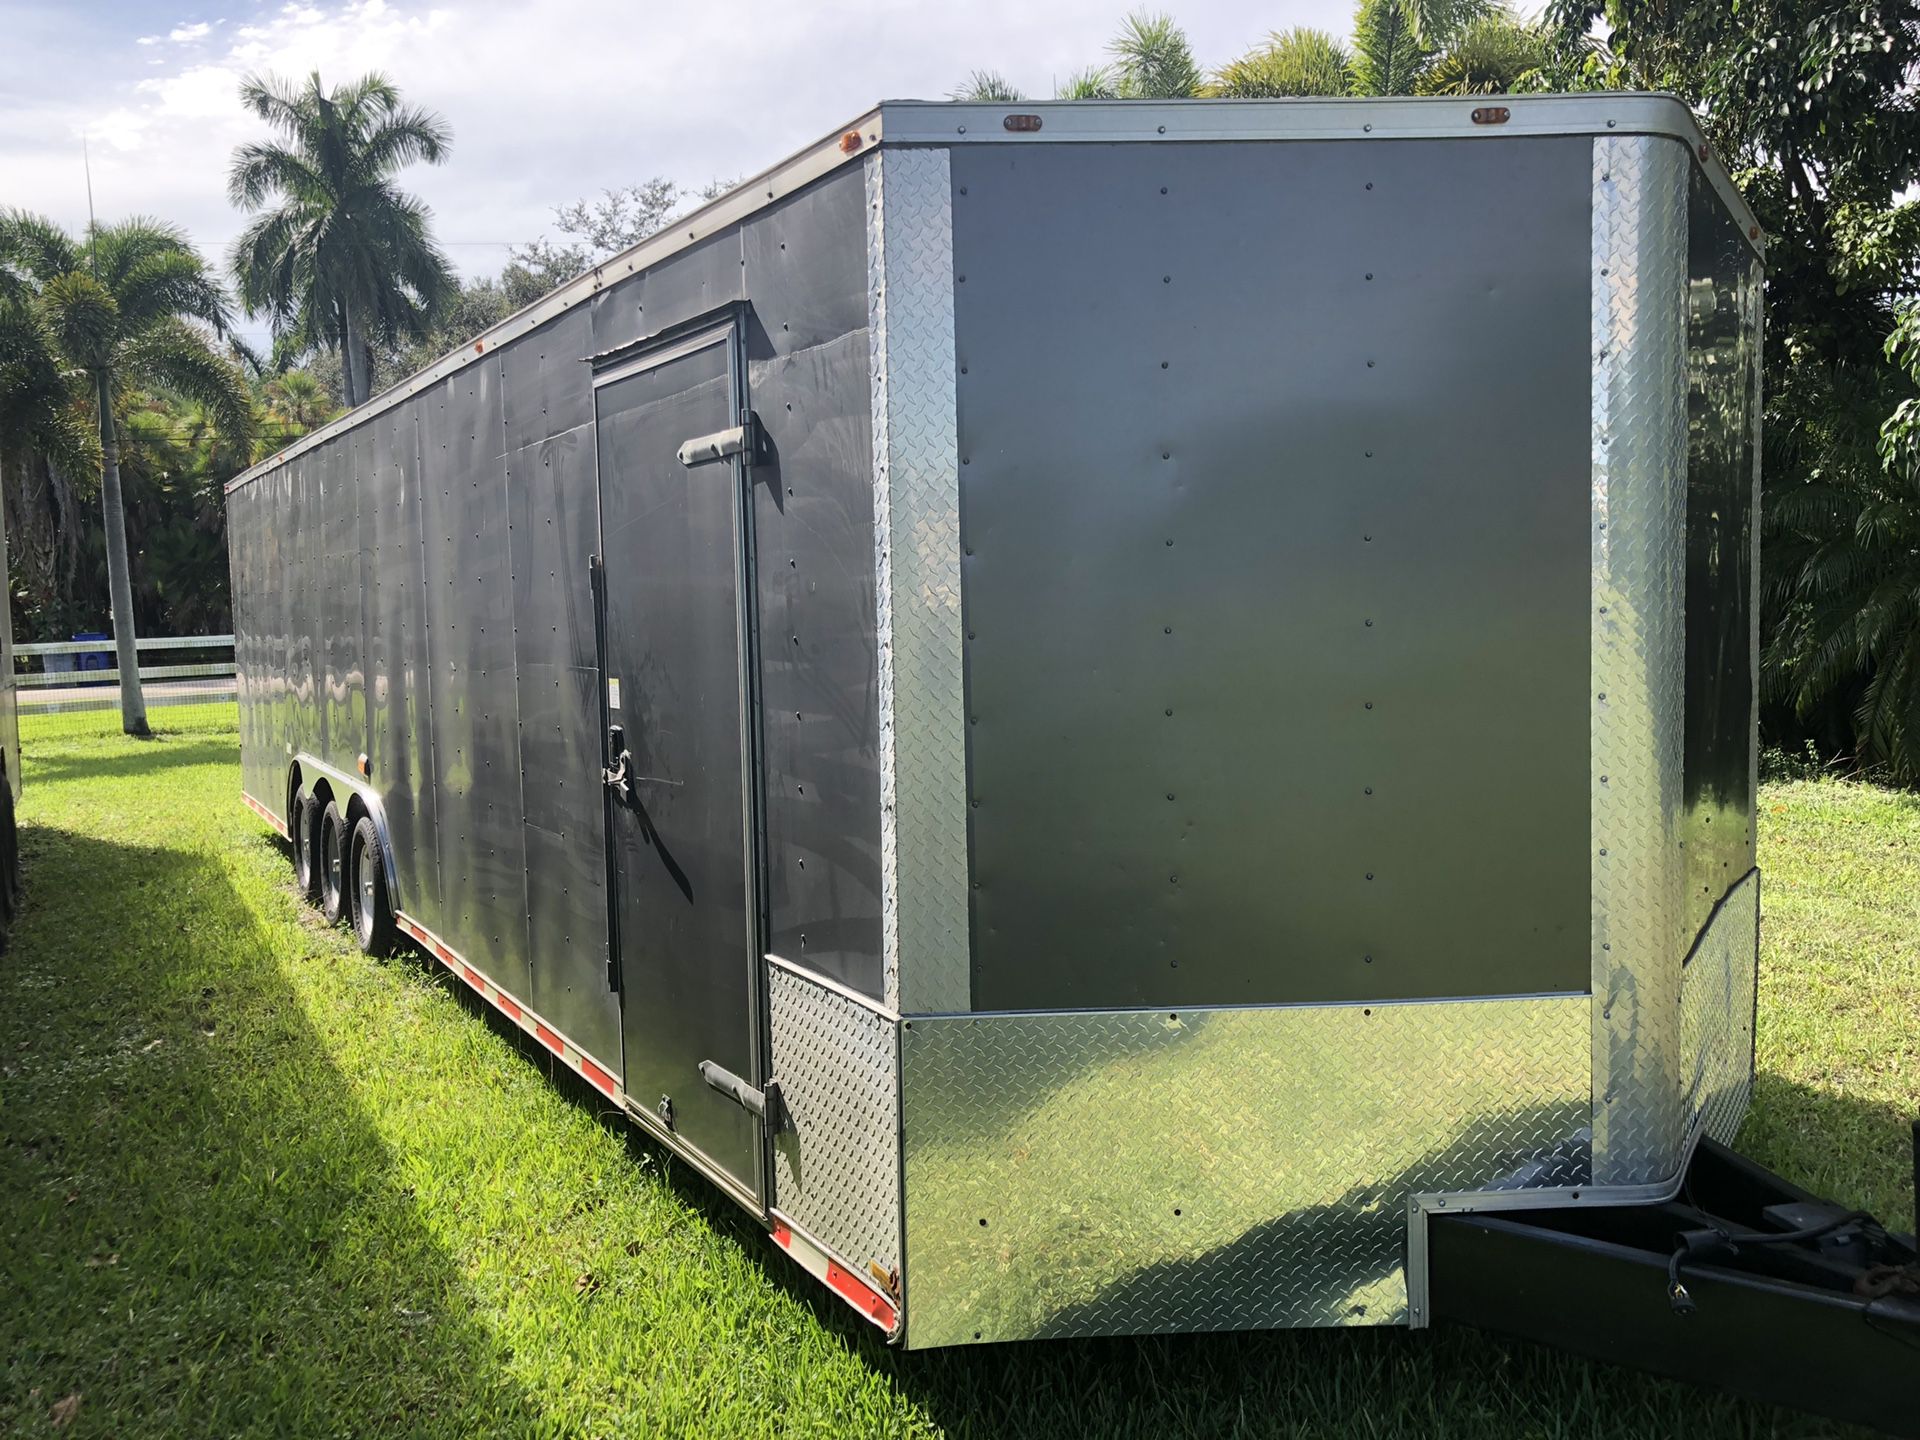 32 Foot trailer 2017 with insulated interior, triple 6000 axle, brakes